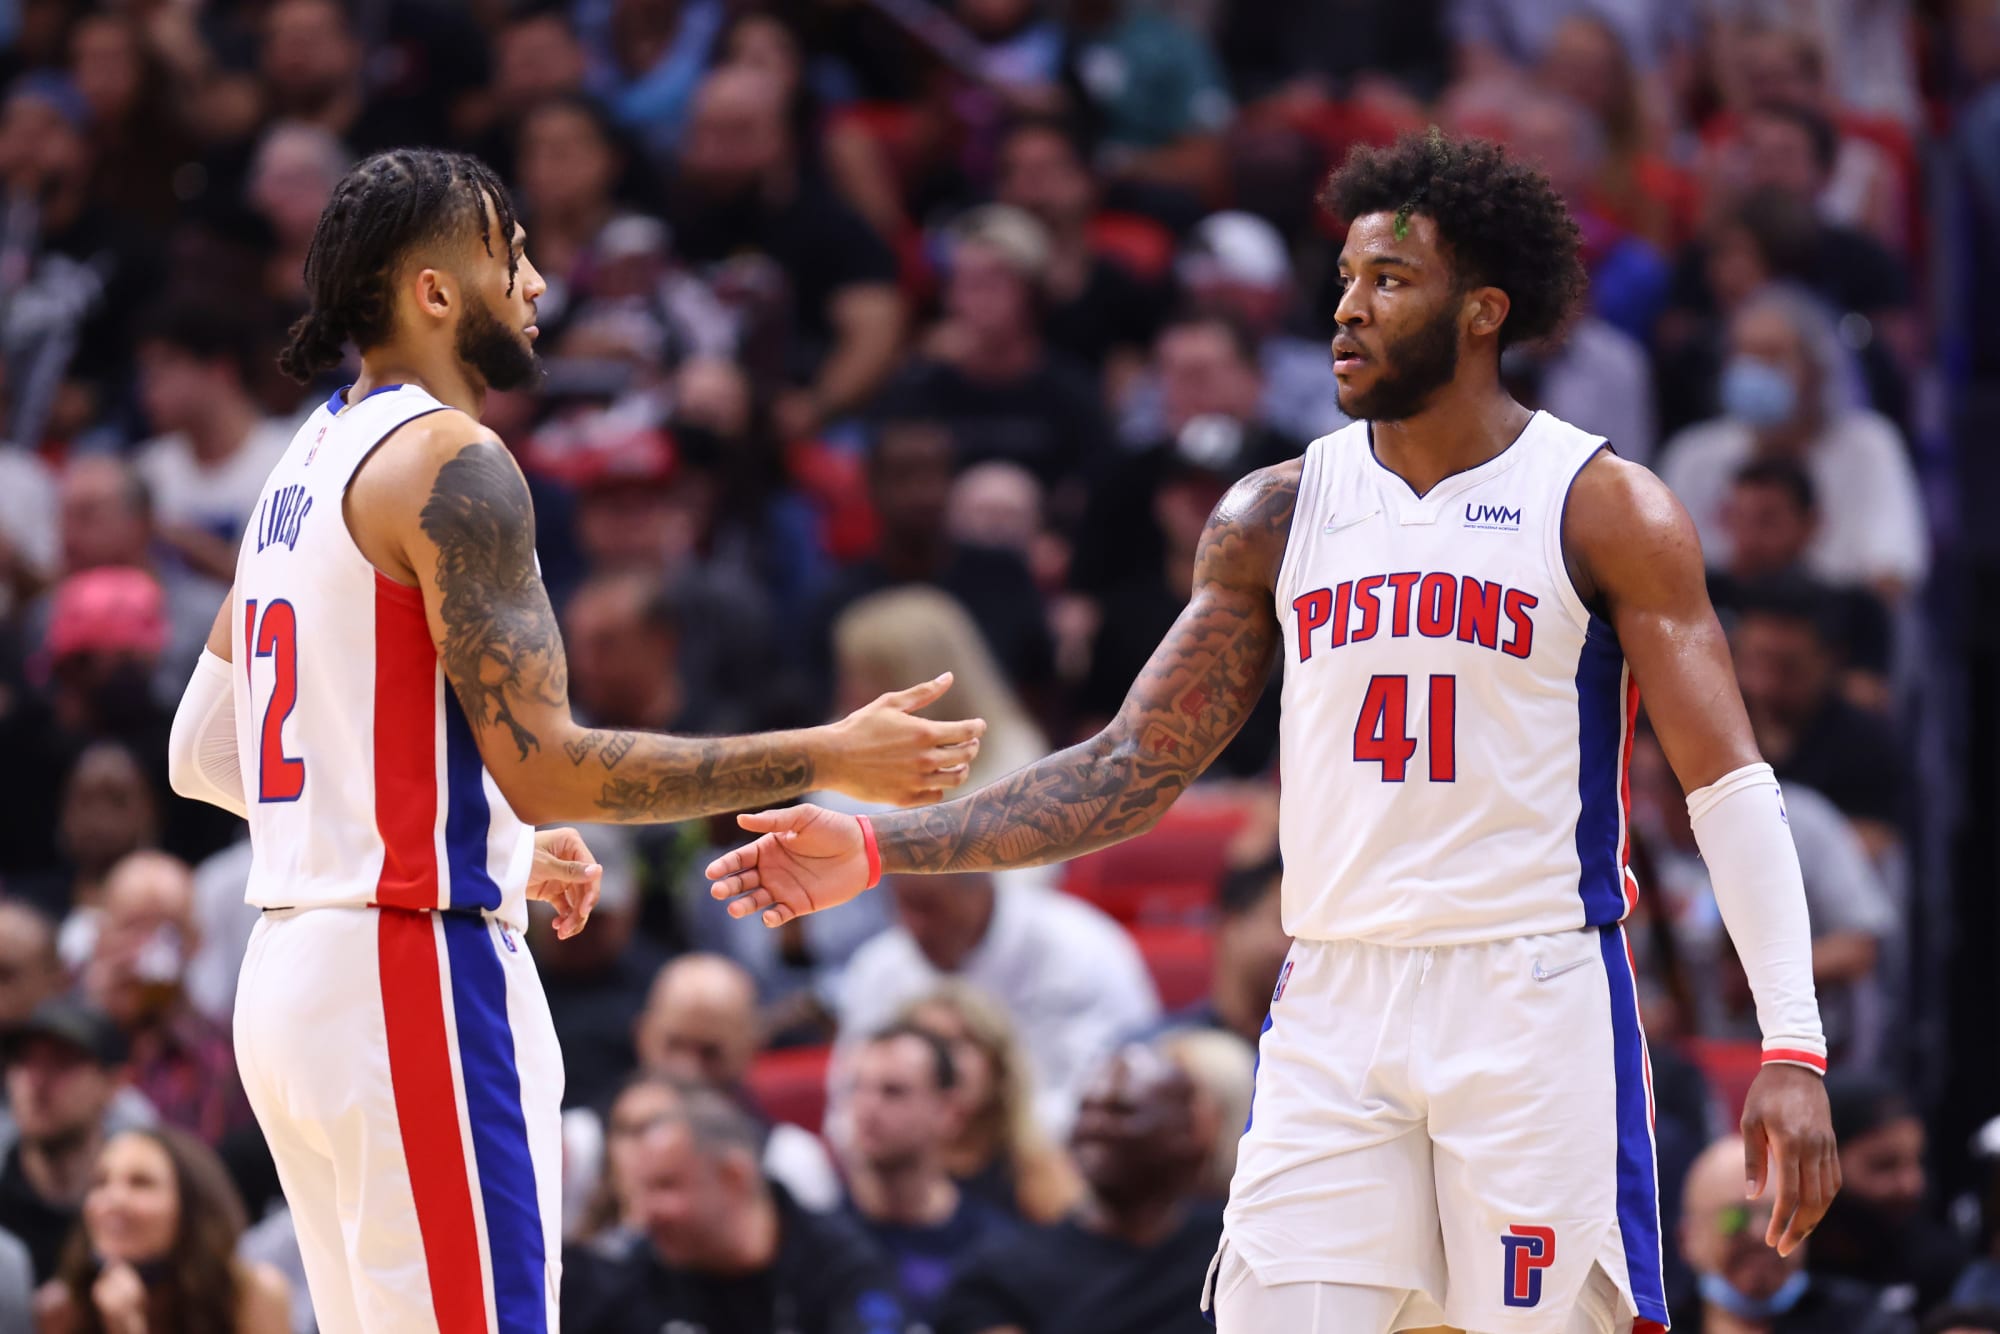 Pistons starting lineup: Detroit could play small ball